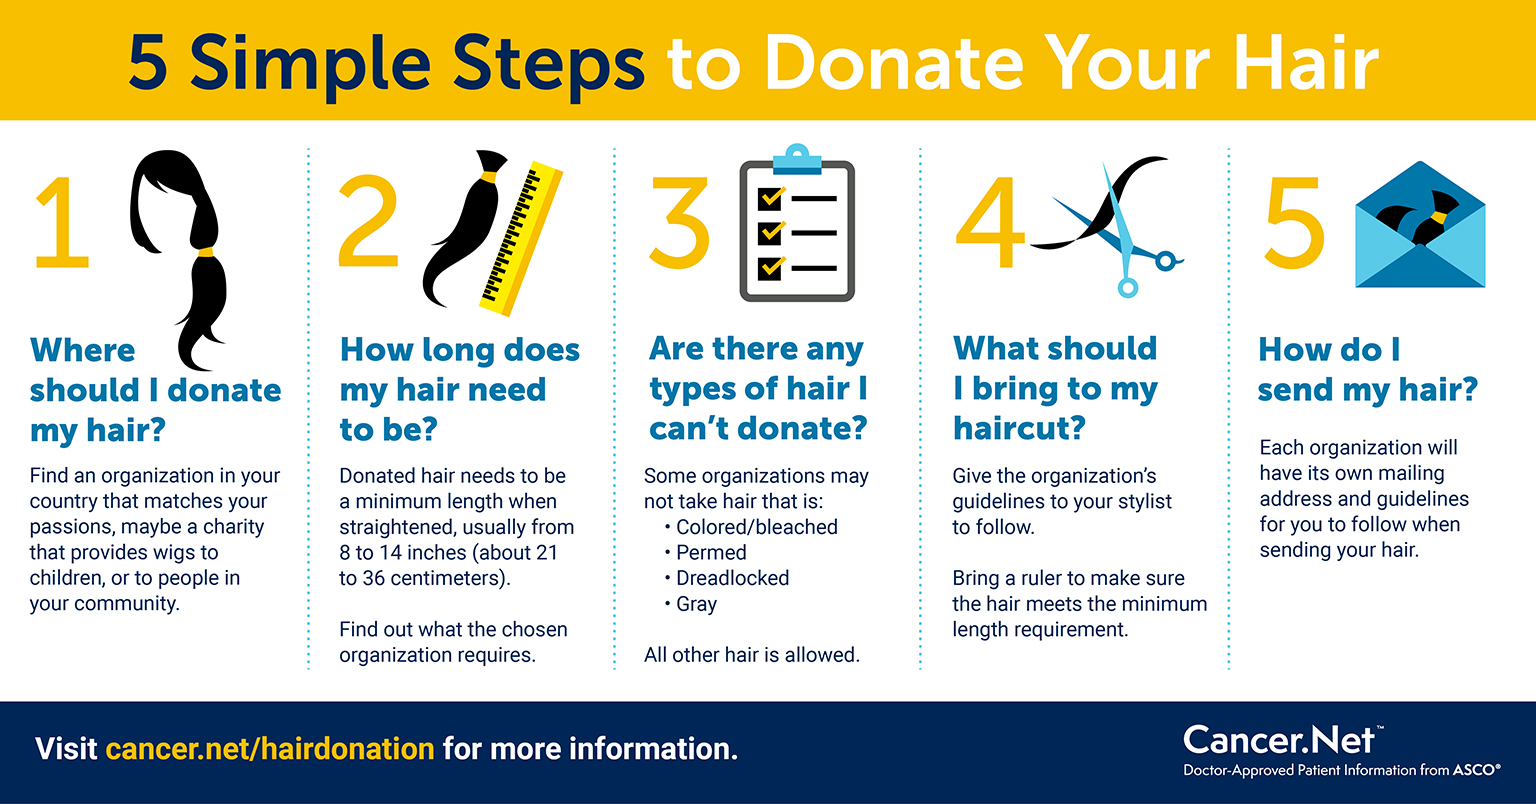 How to Donate Your Hair to Help People With Cancer | Cancer.Net